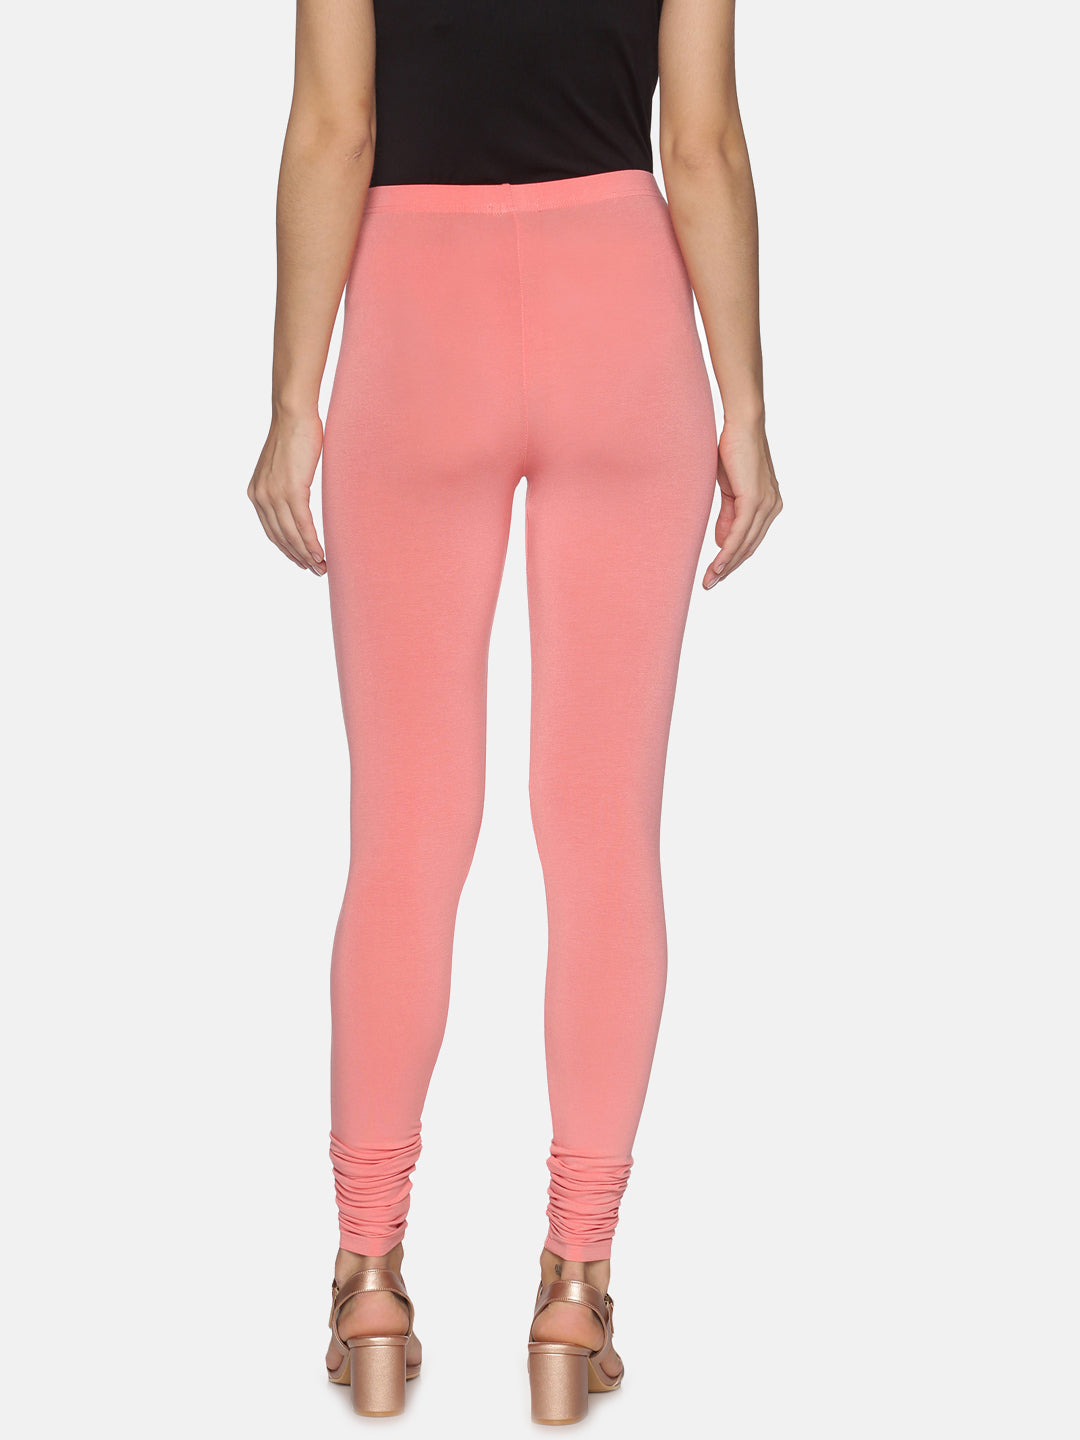 LEGGING BY COLOR,COLORFUL LEGGINGS FOR WOMEN MANUFACTURERS INDIA